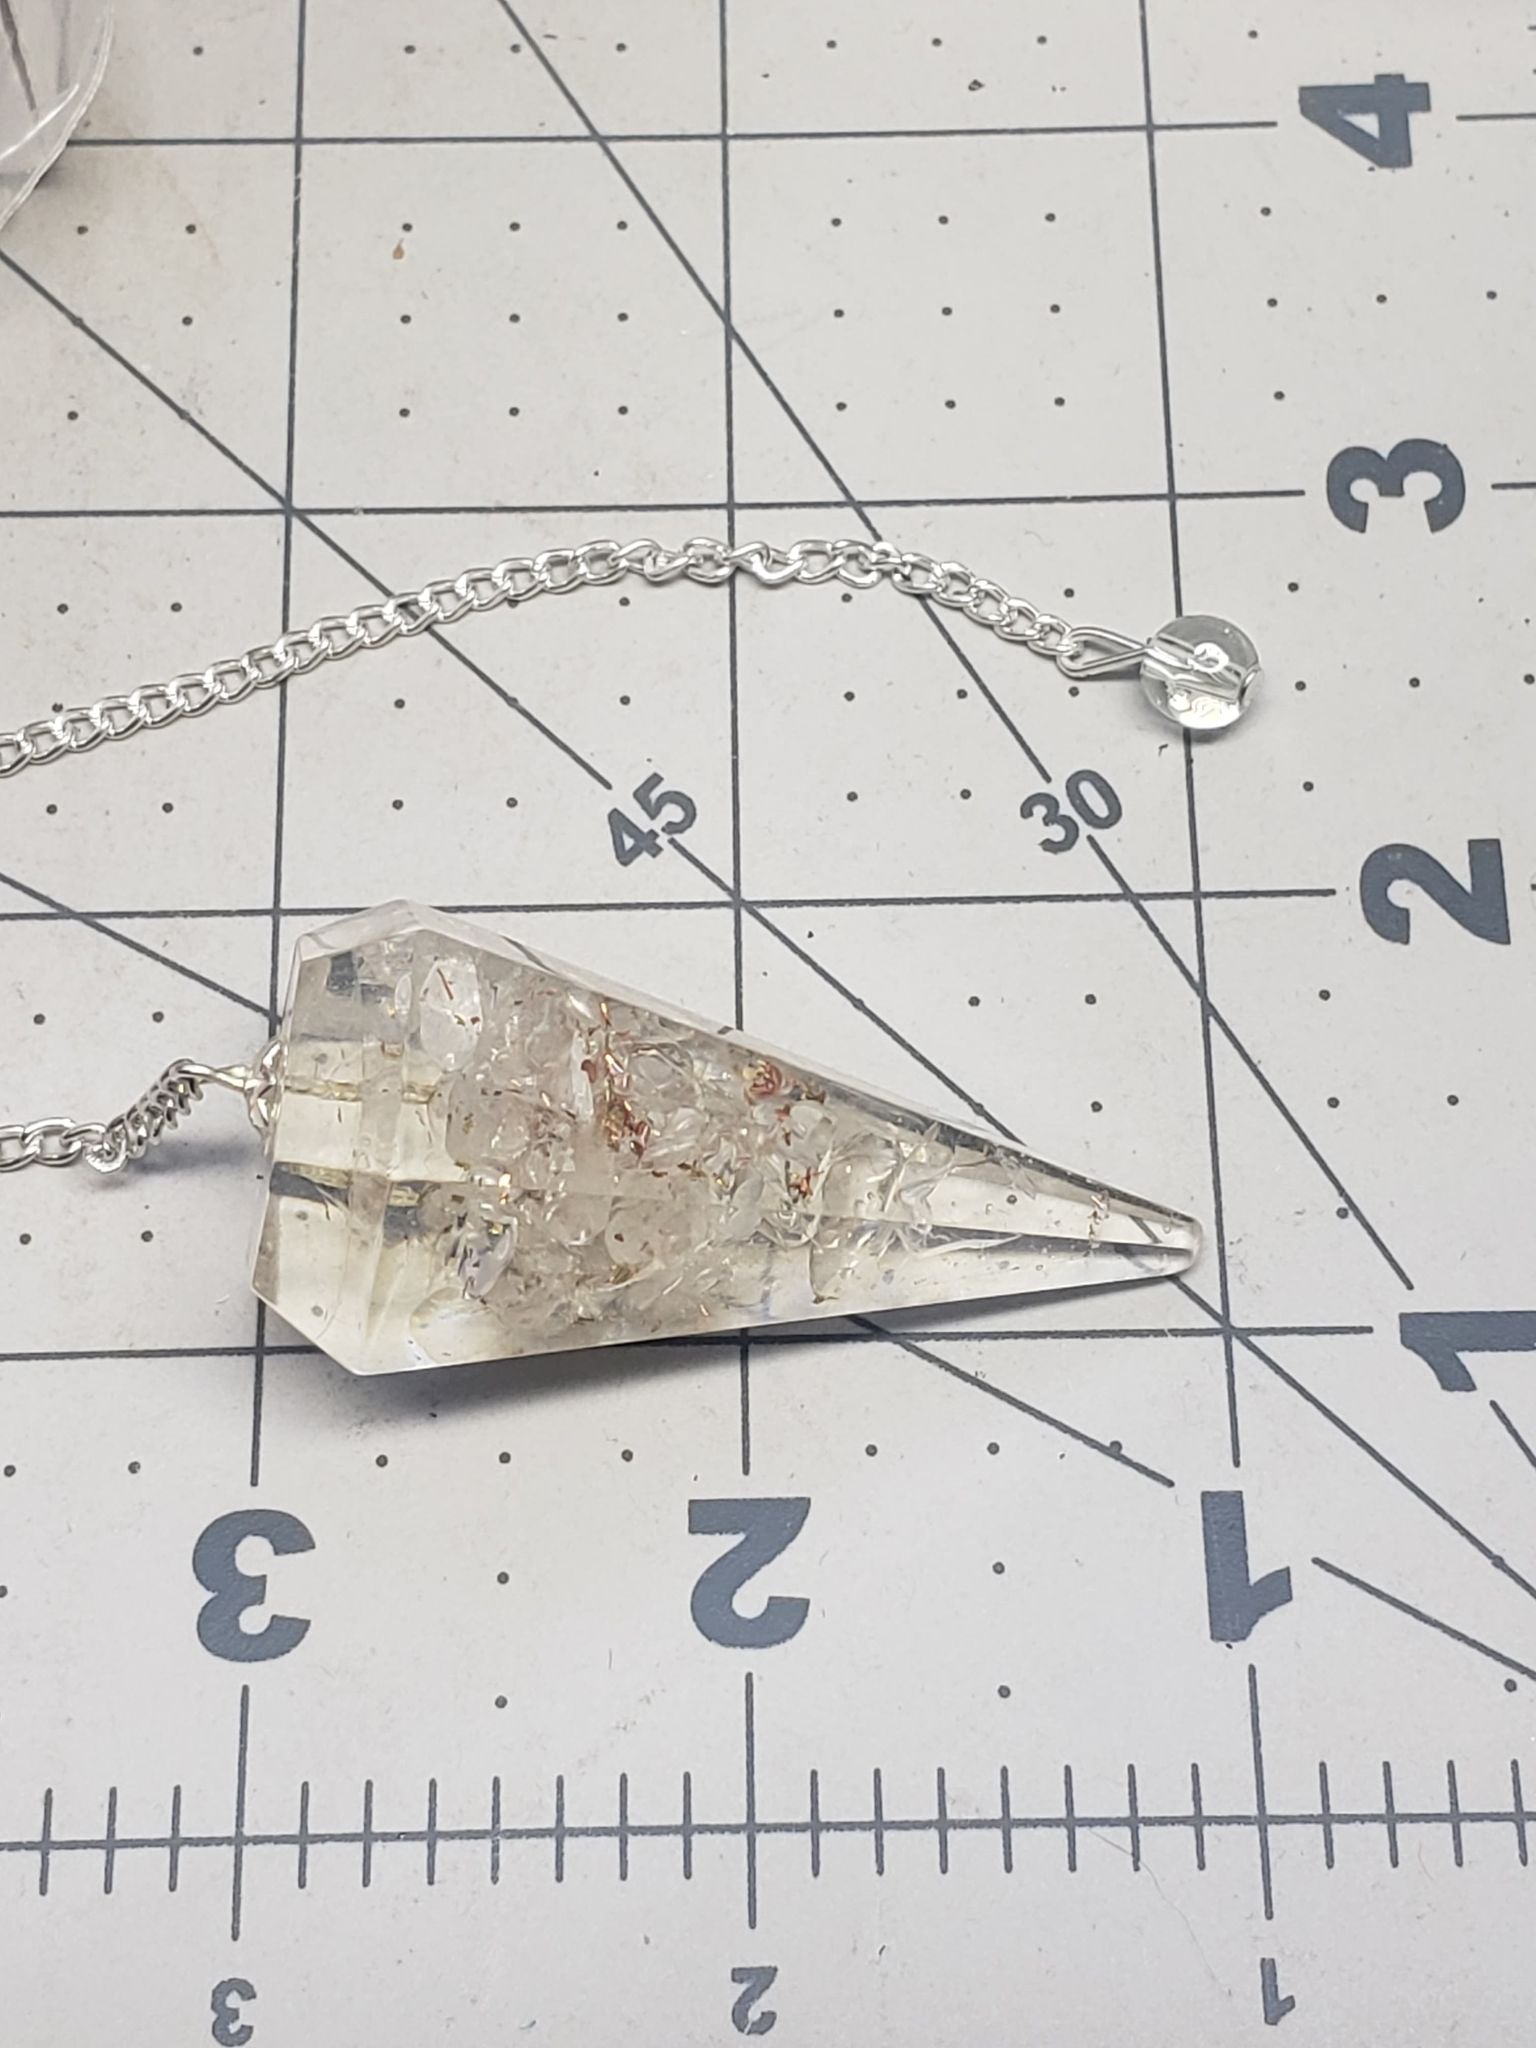 Clear Quartz 2 inch orgonite pendulum suspended from a silver 8 inch chain displayed next to a ruler